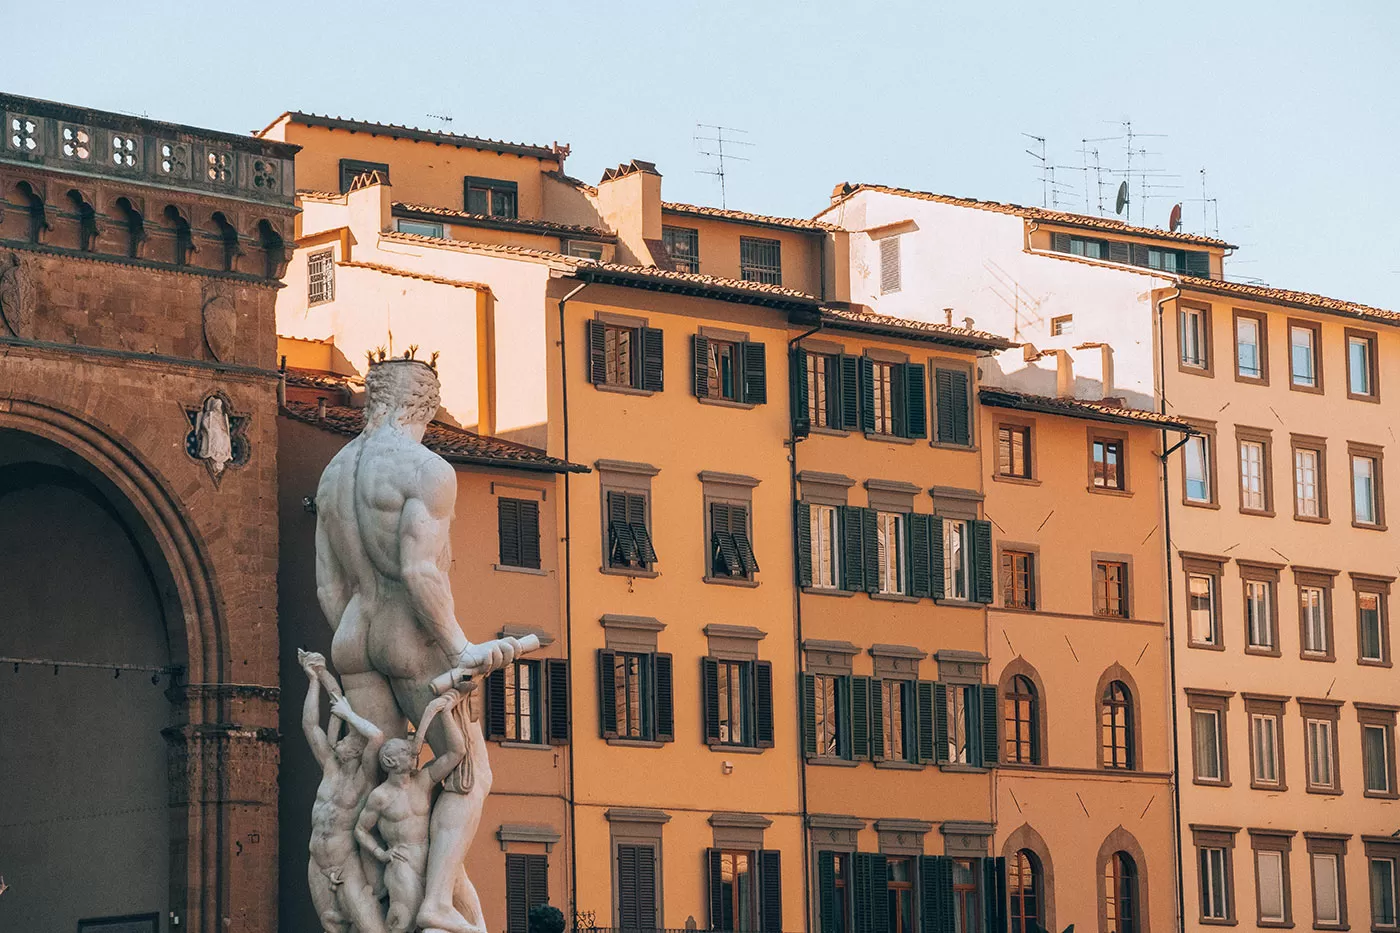 Free Things to do in Florence - Piazza della Signoria and Fountain of Neptune